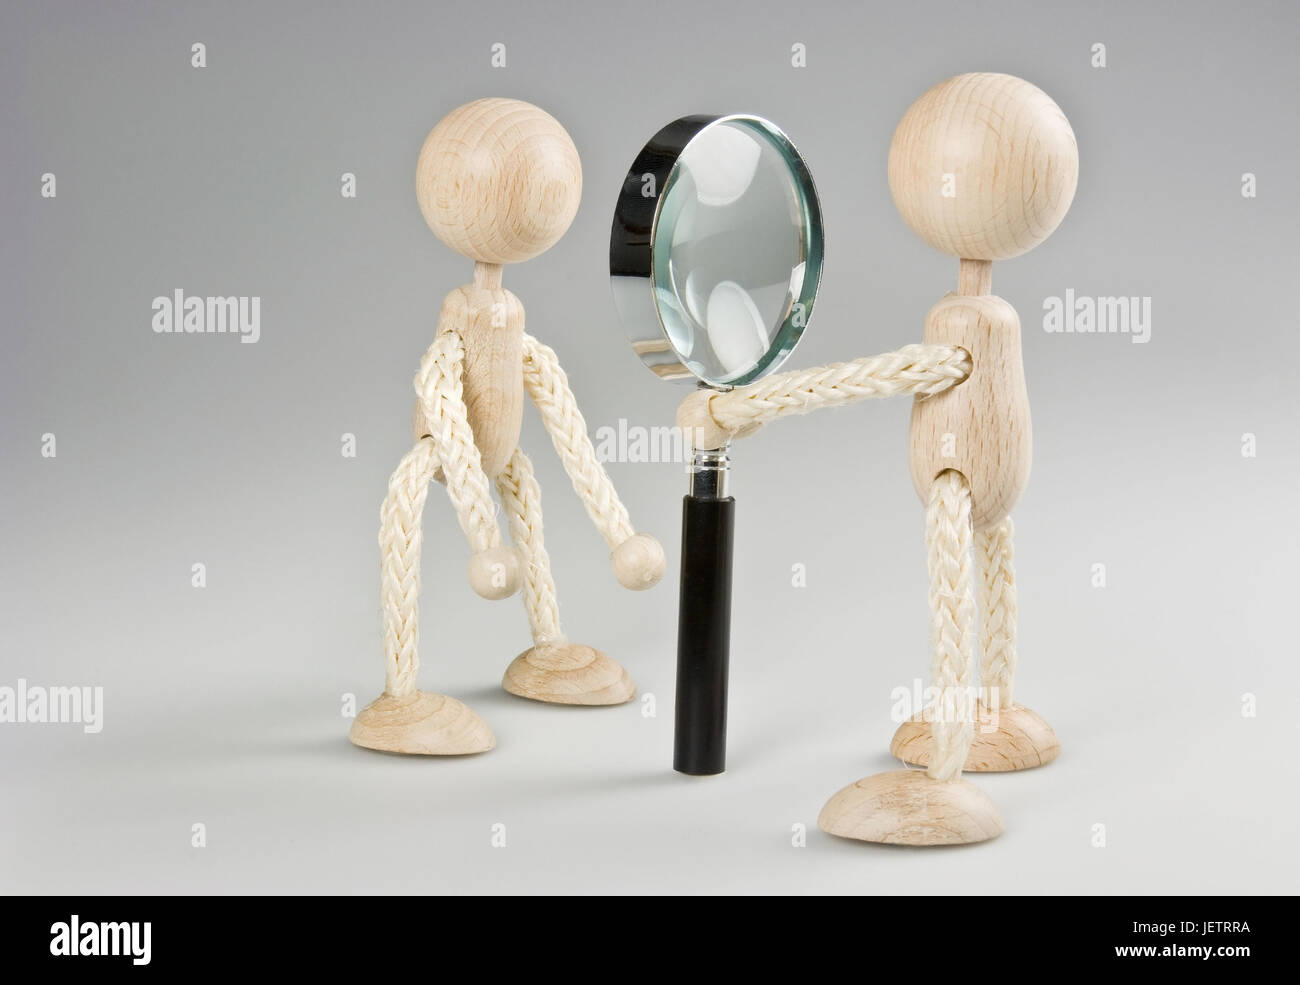 Two wooden figures with magnifying glass, Zwei Holzfiguren mit Lupe Stock Photo